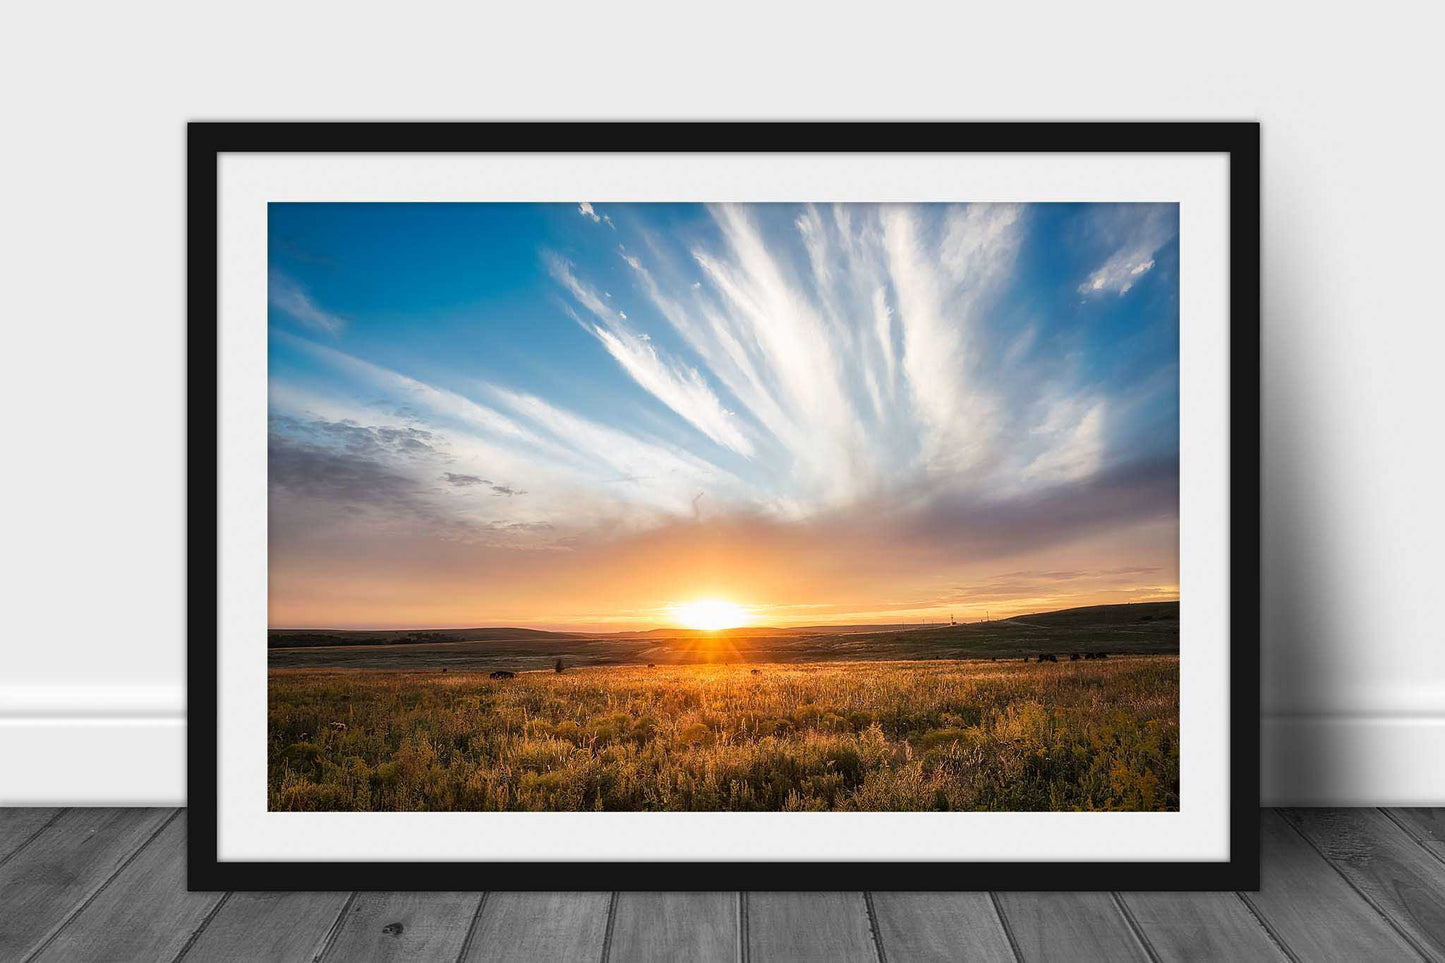 Framed Great Plains print of a golden sunset taking place over the Tallgrass Prairie on an autumn evening in Osage County, Oklahoma by Sean Ramsey of Southern Plains Photography.